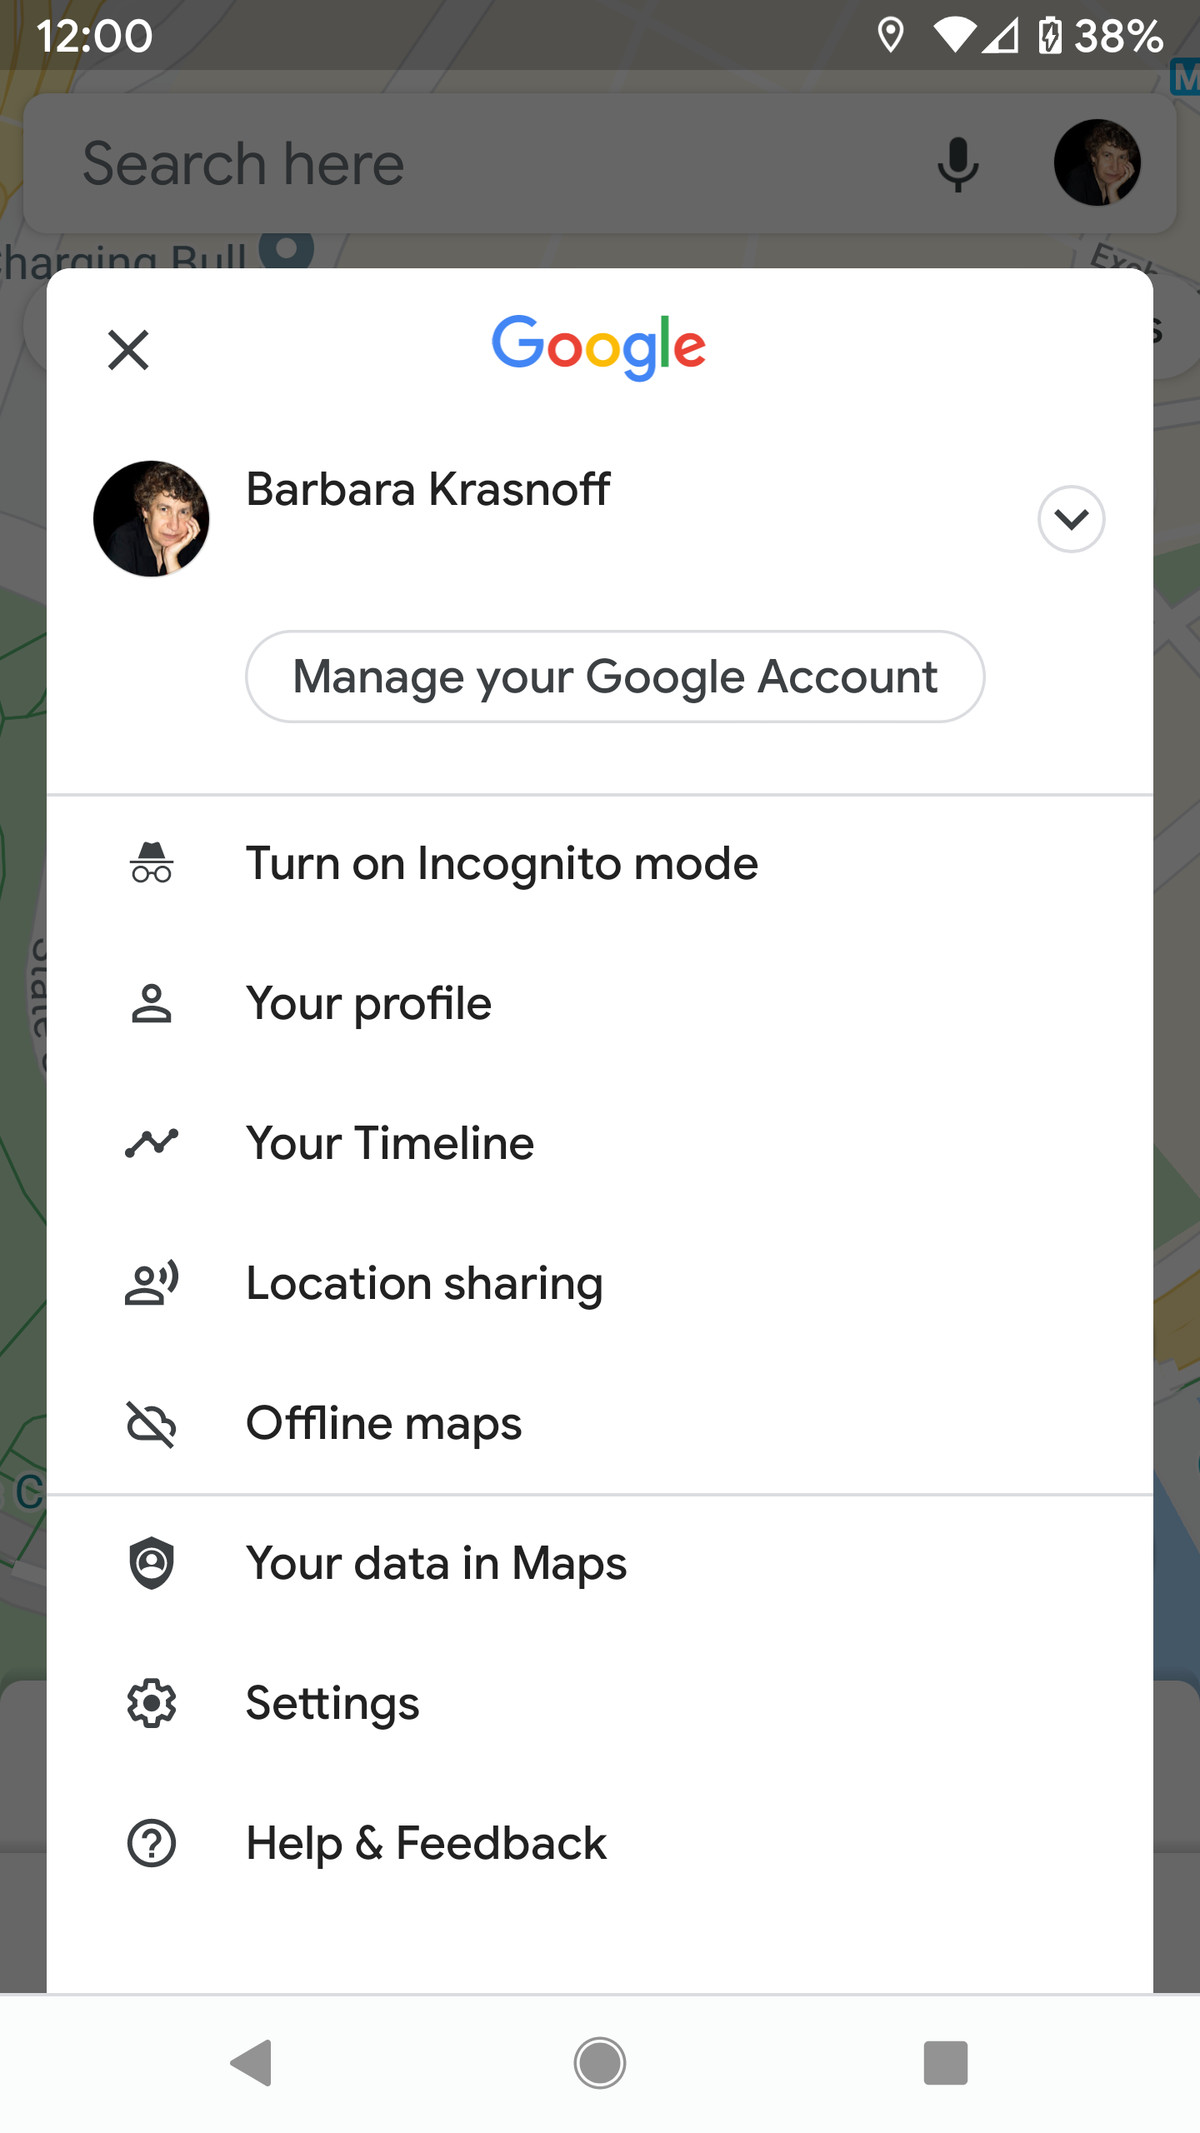 Go to “Location sharing” in your Maps app.